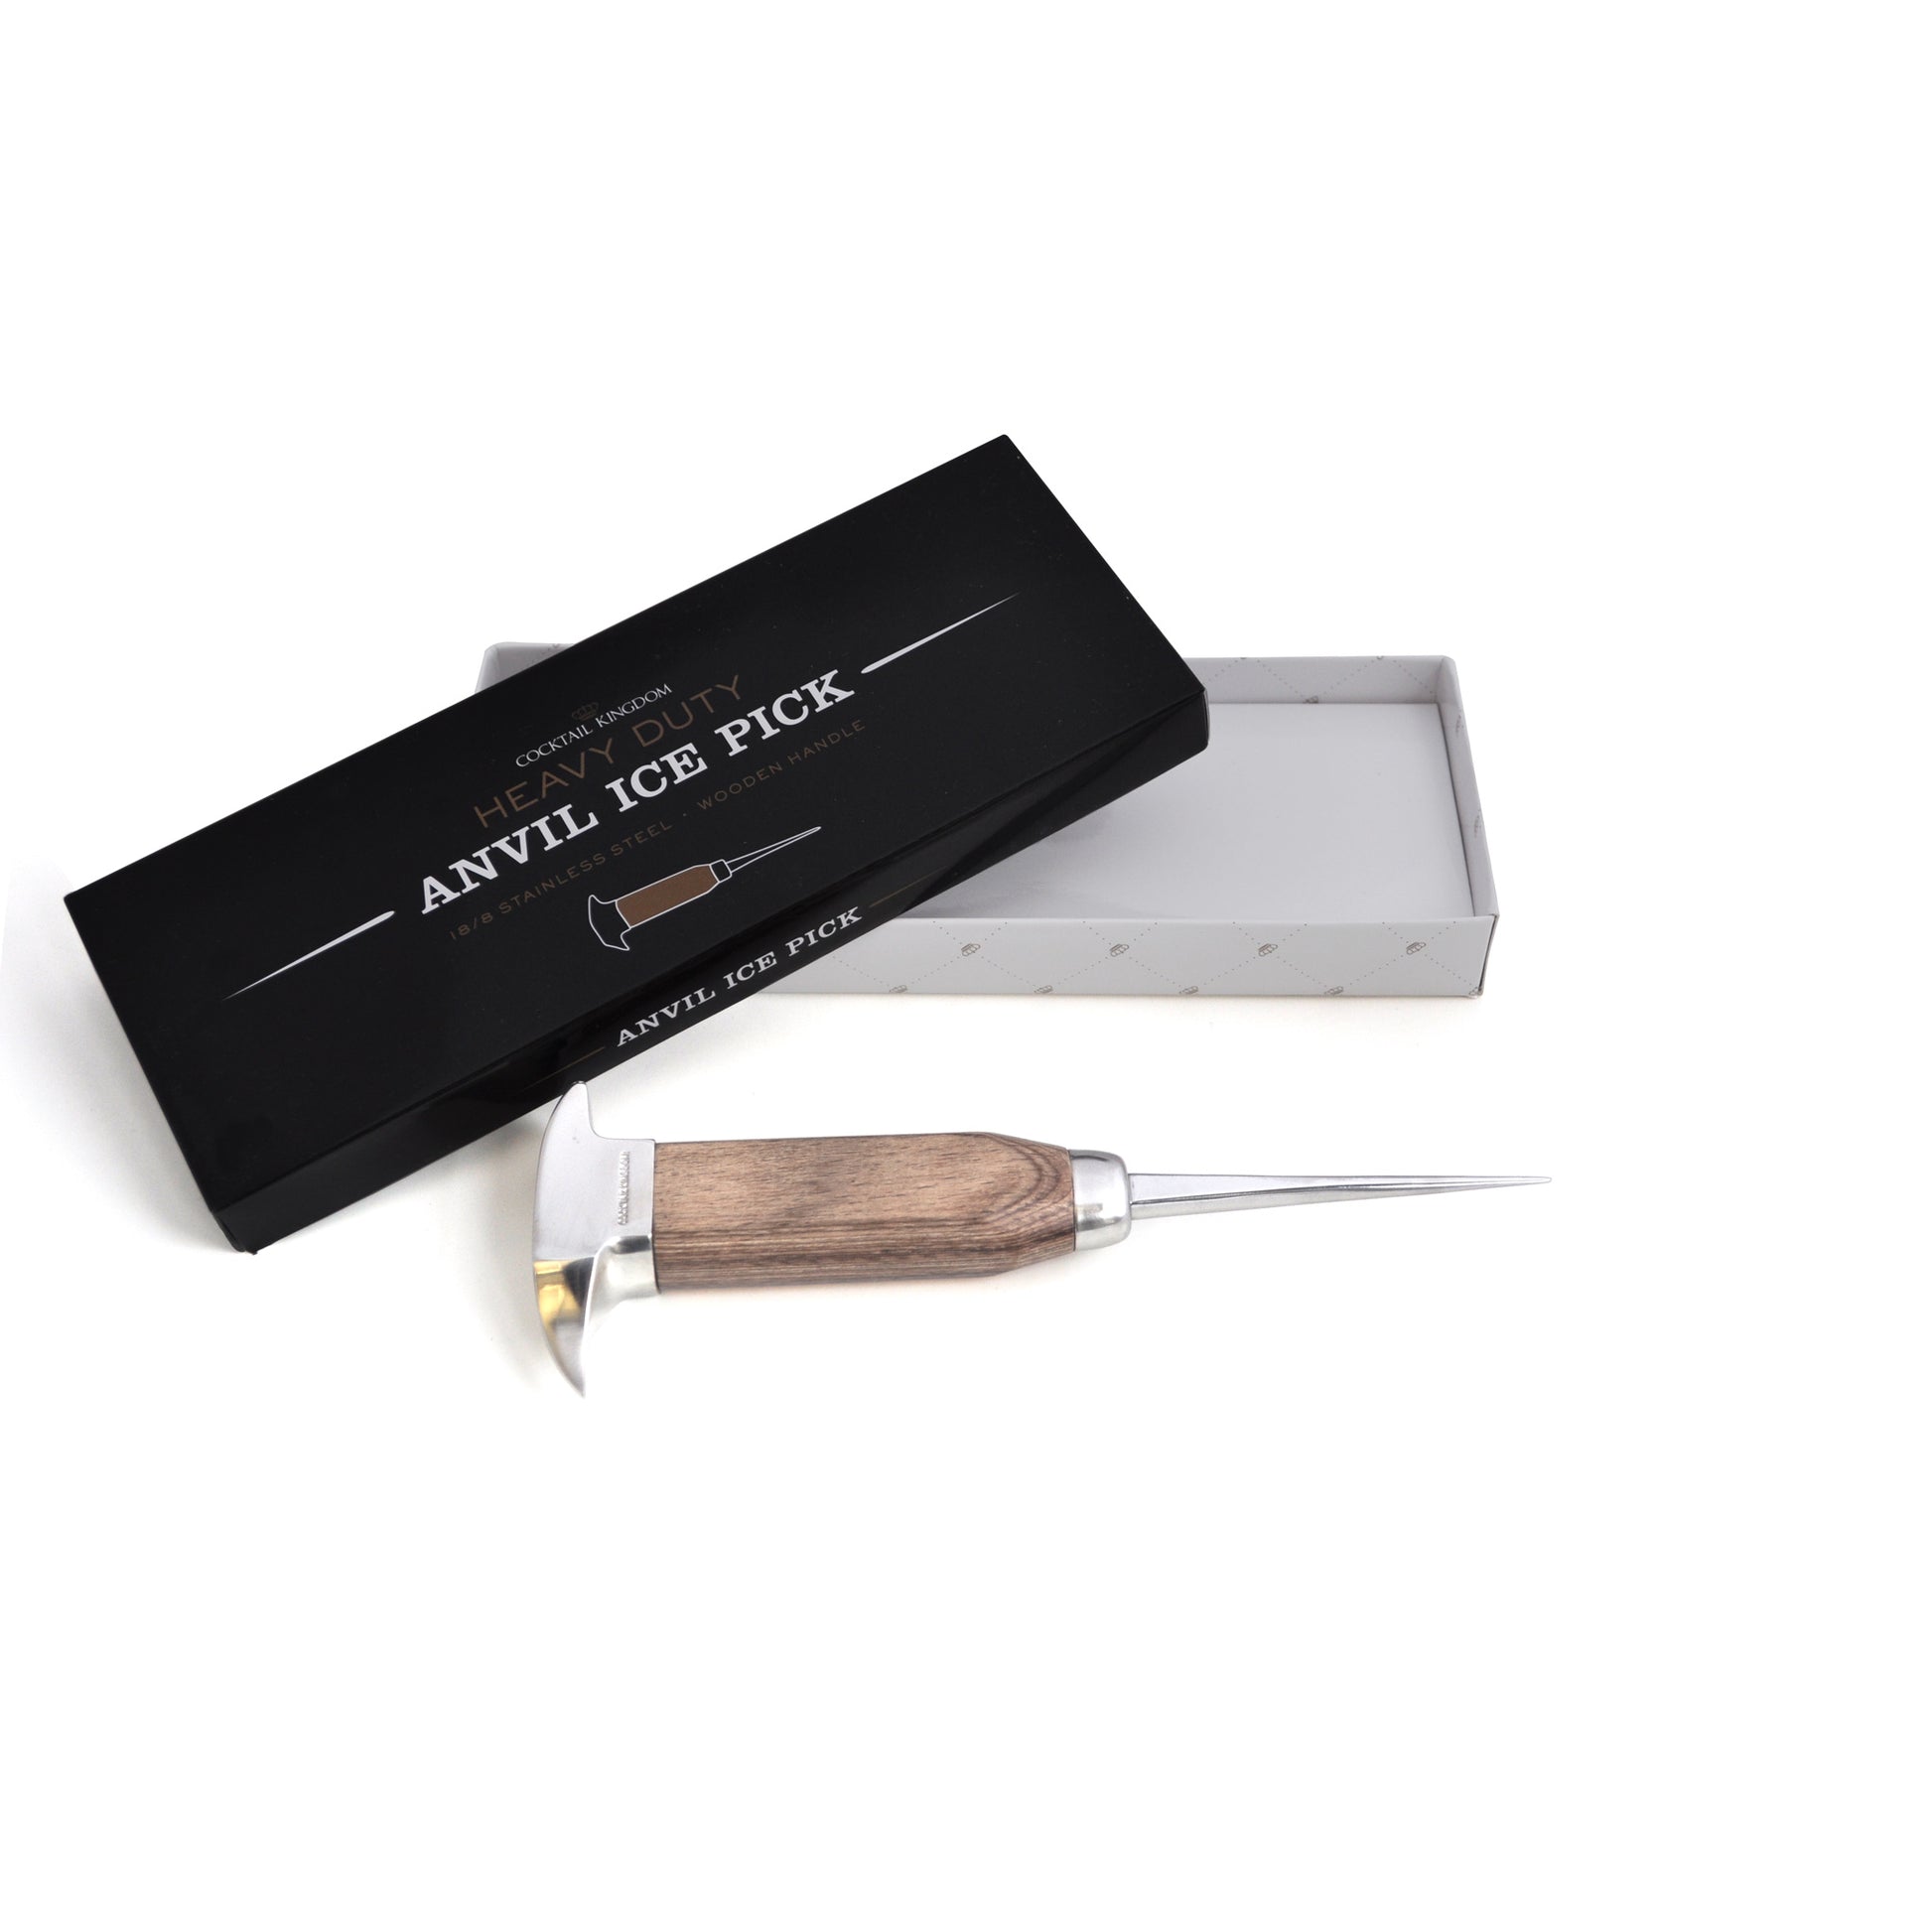 ANVIL™ ICE PICK – WOOD AND STAINLESS STEEL